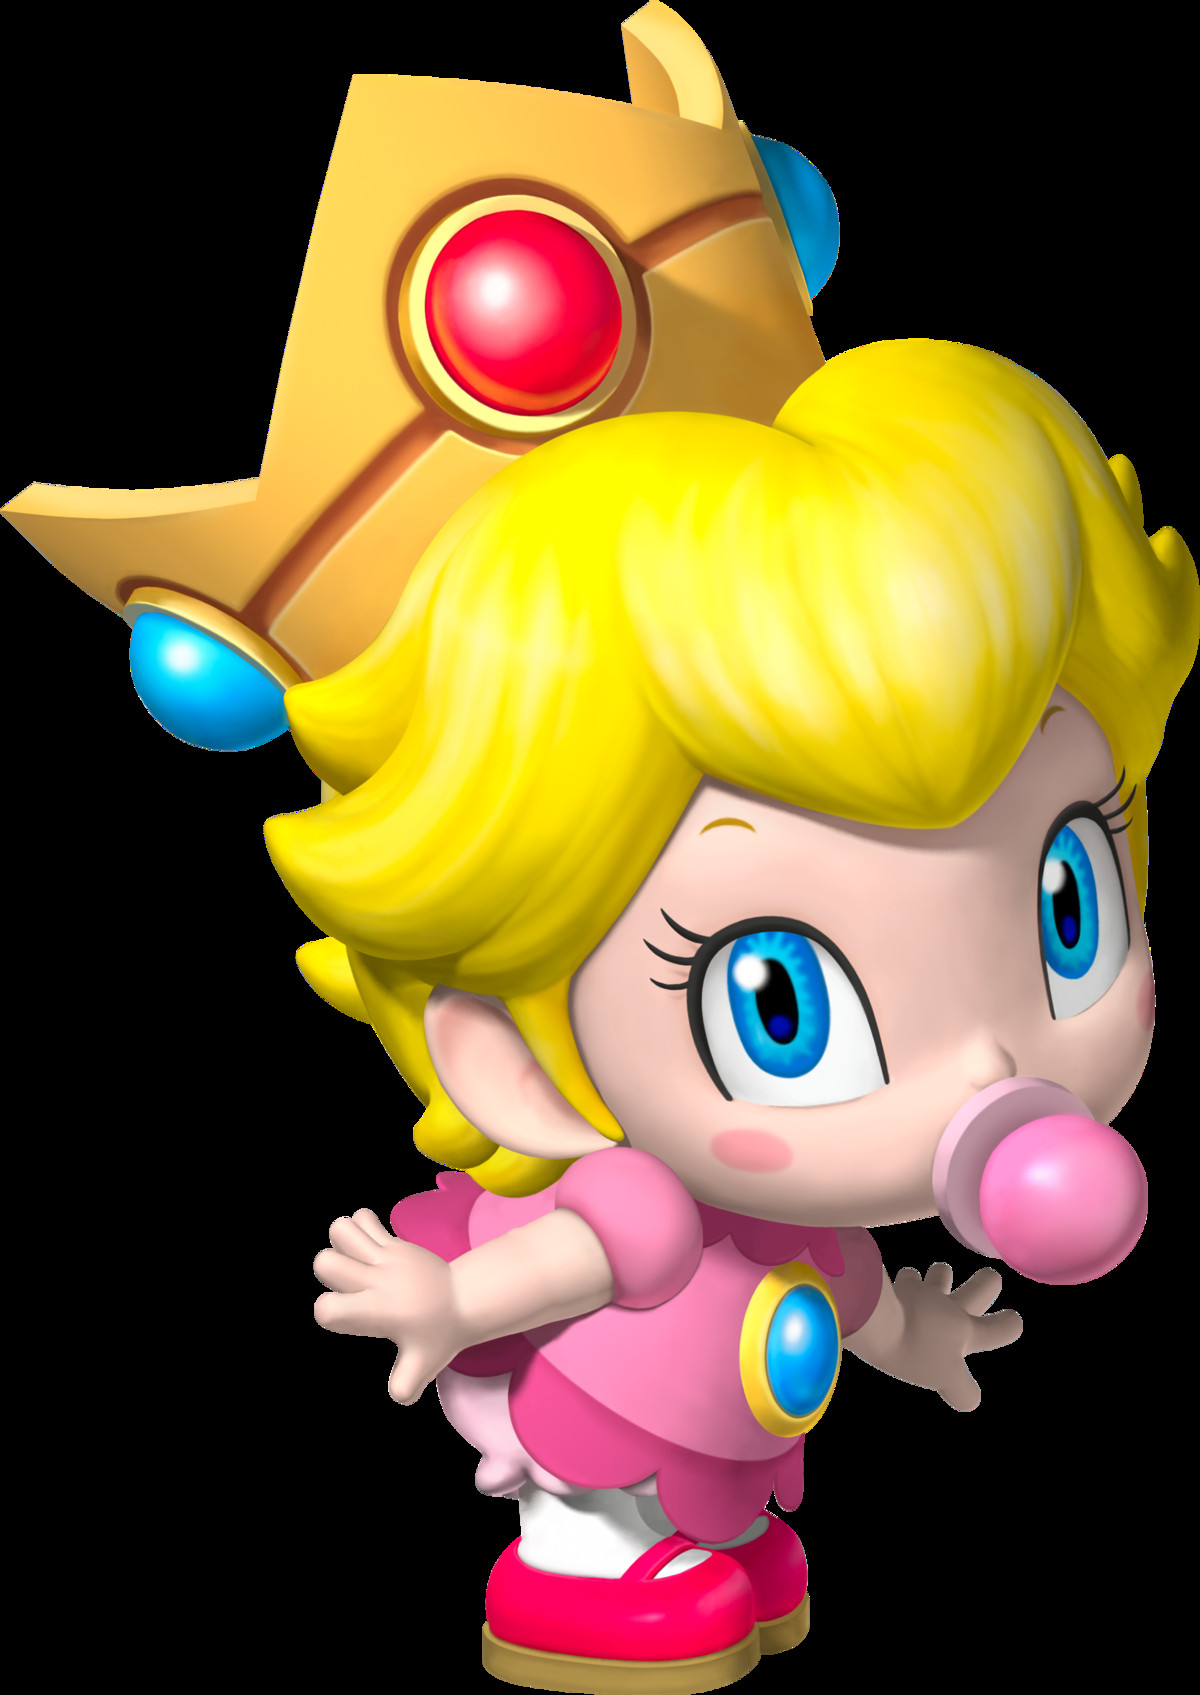 Pictures of baby peach